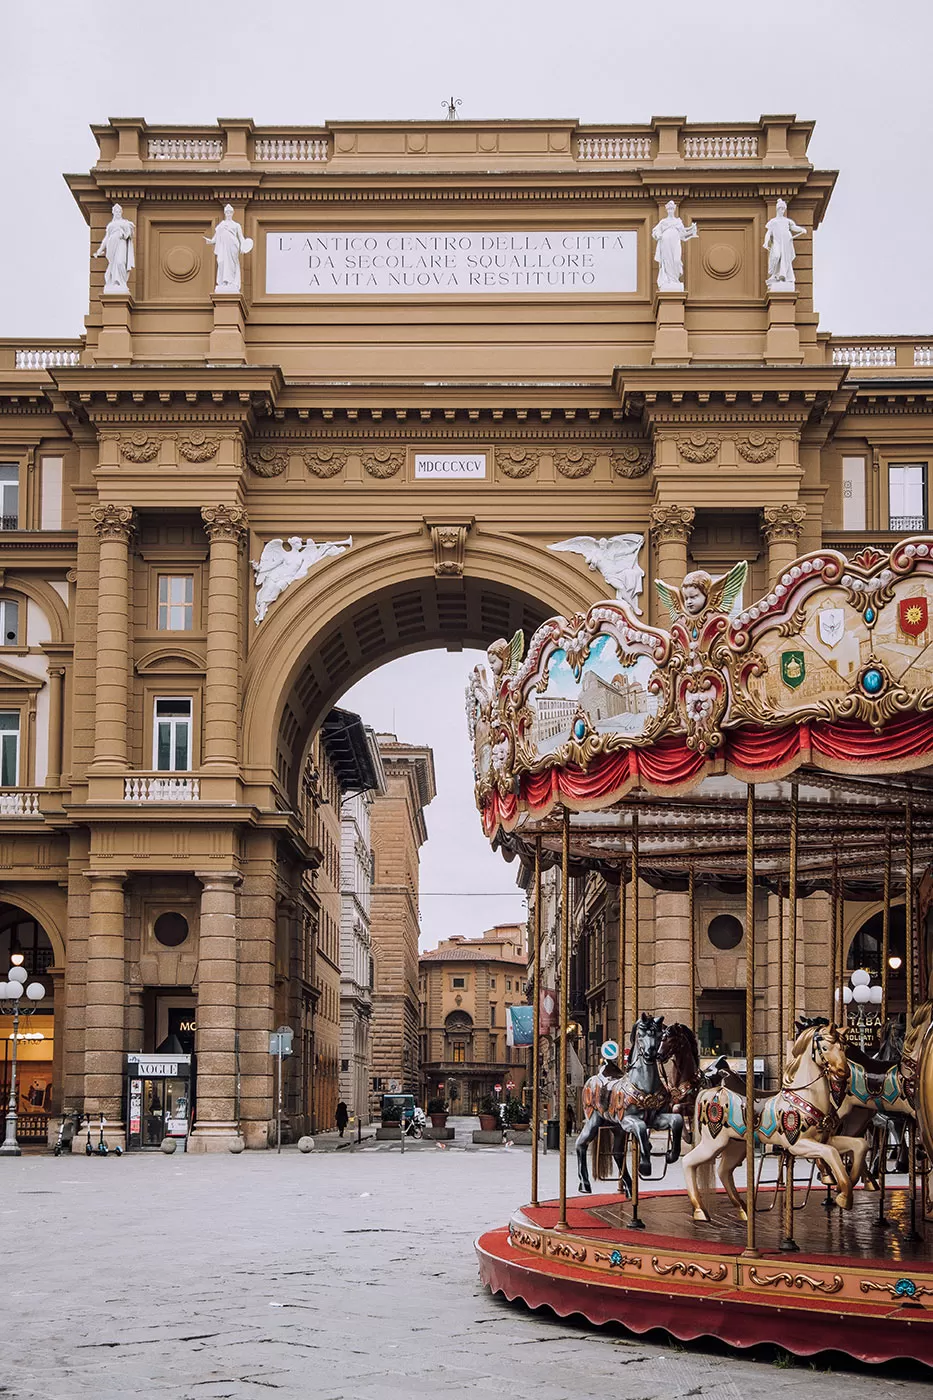 Best things to do in Florence - Piazza della Repubblica.jpg and Carousel